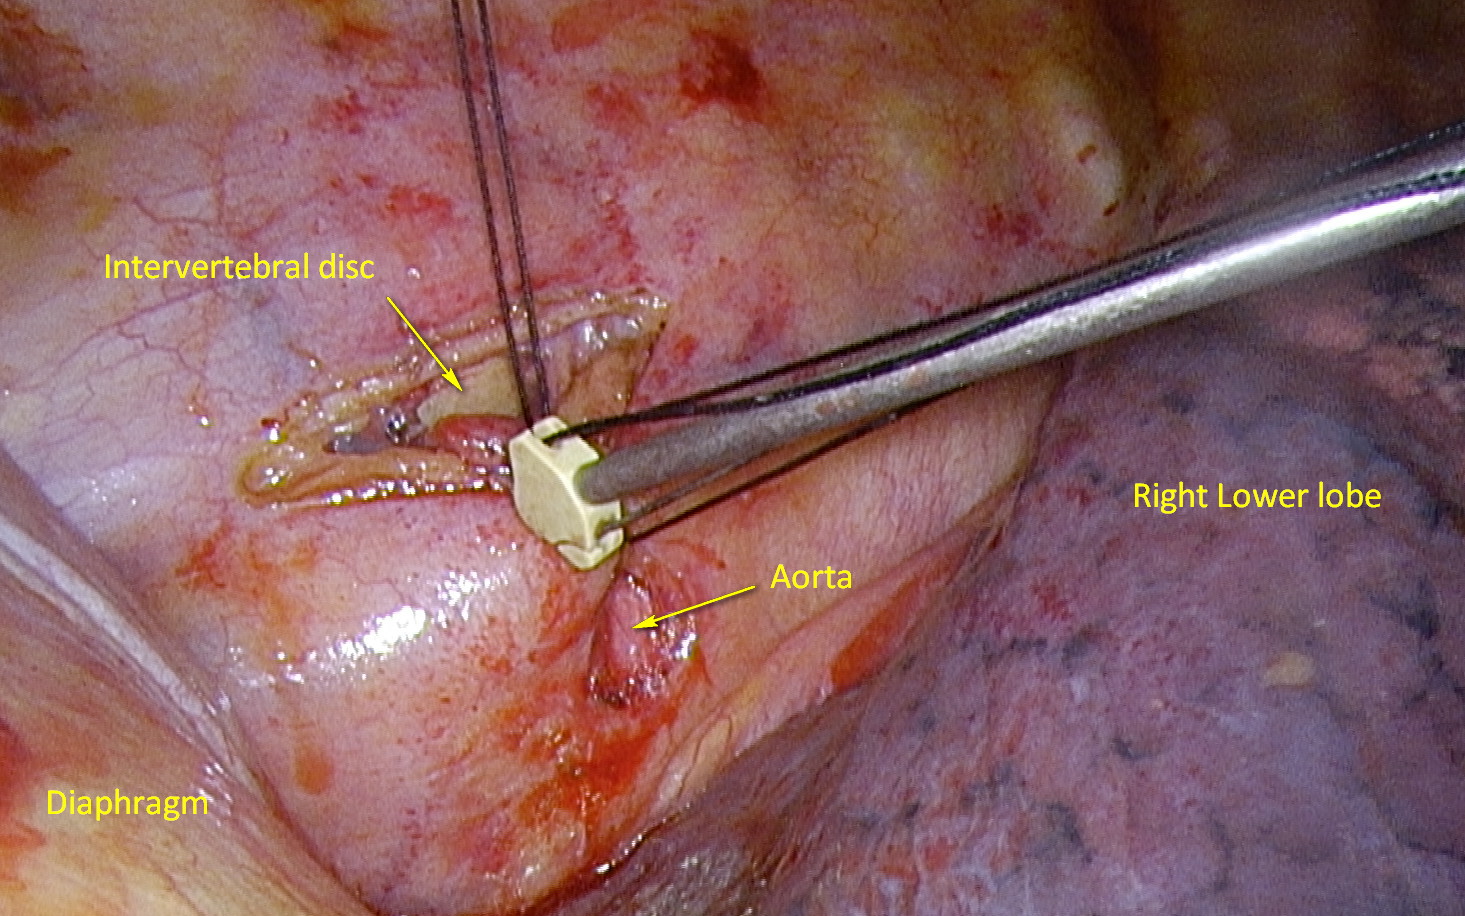 Ties are secured using knot-pusher to complete mass ligation of the thoracic duct